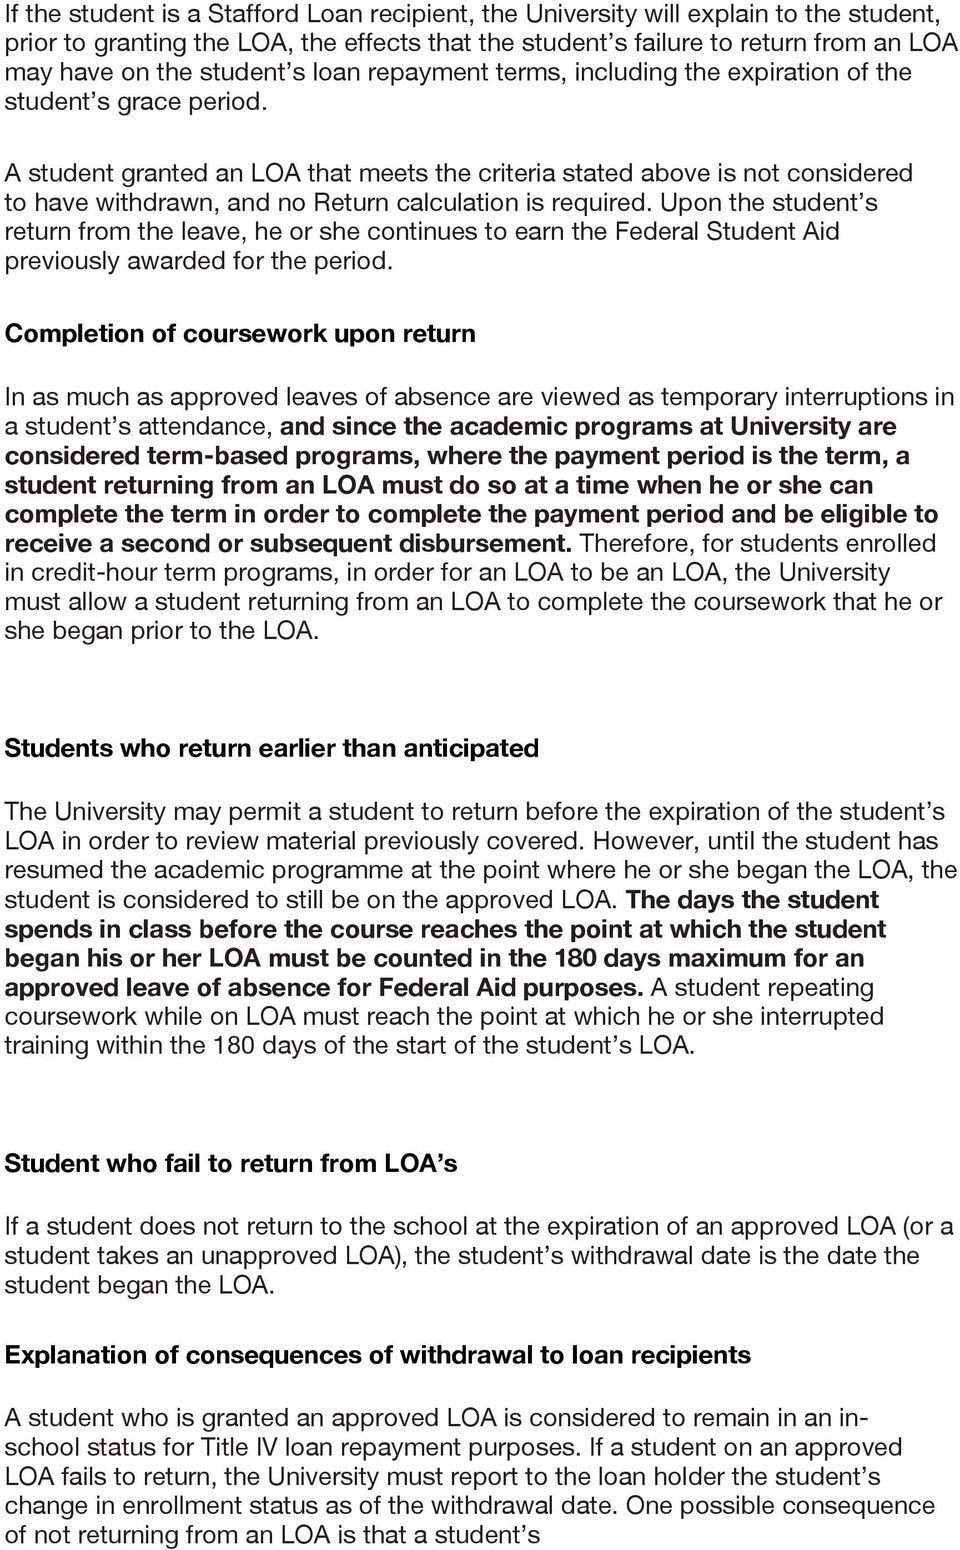 A student granted an LOA that meets the criteria stated above is not considered to have withdrawn, and no Return calculation is required.